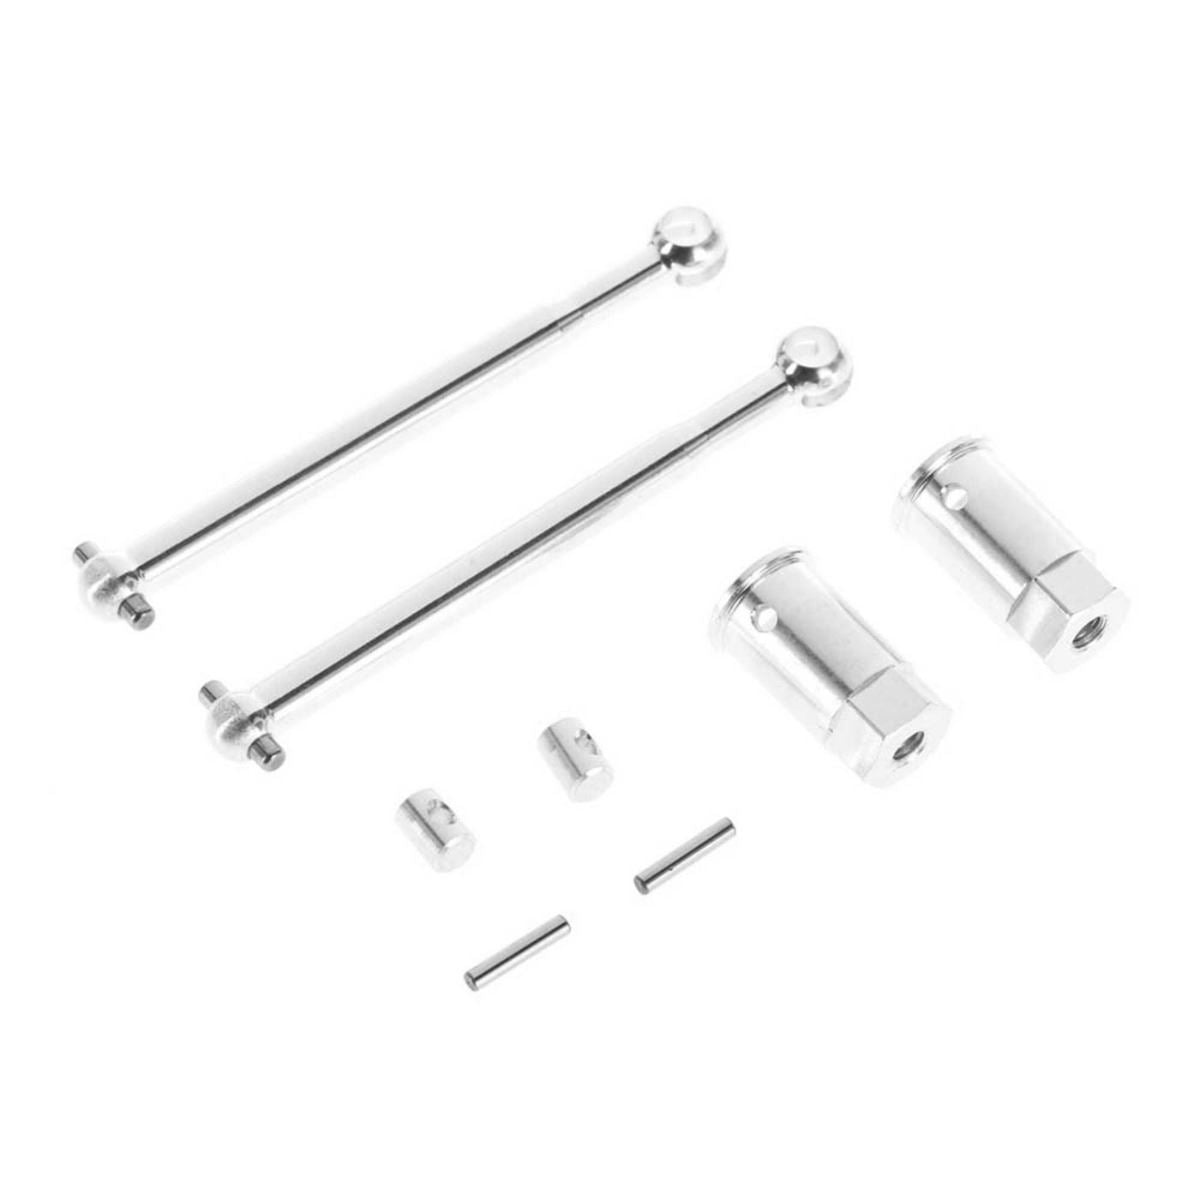 AXIAL Uiversal-Joint Set 48mm (2)